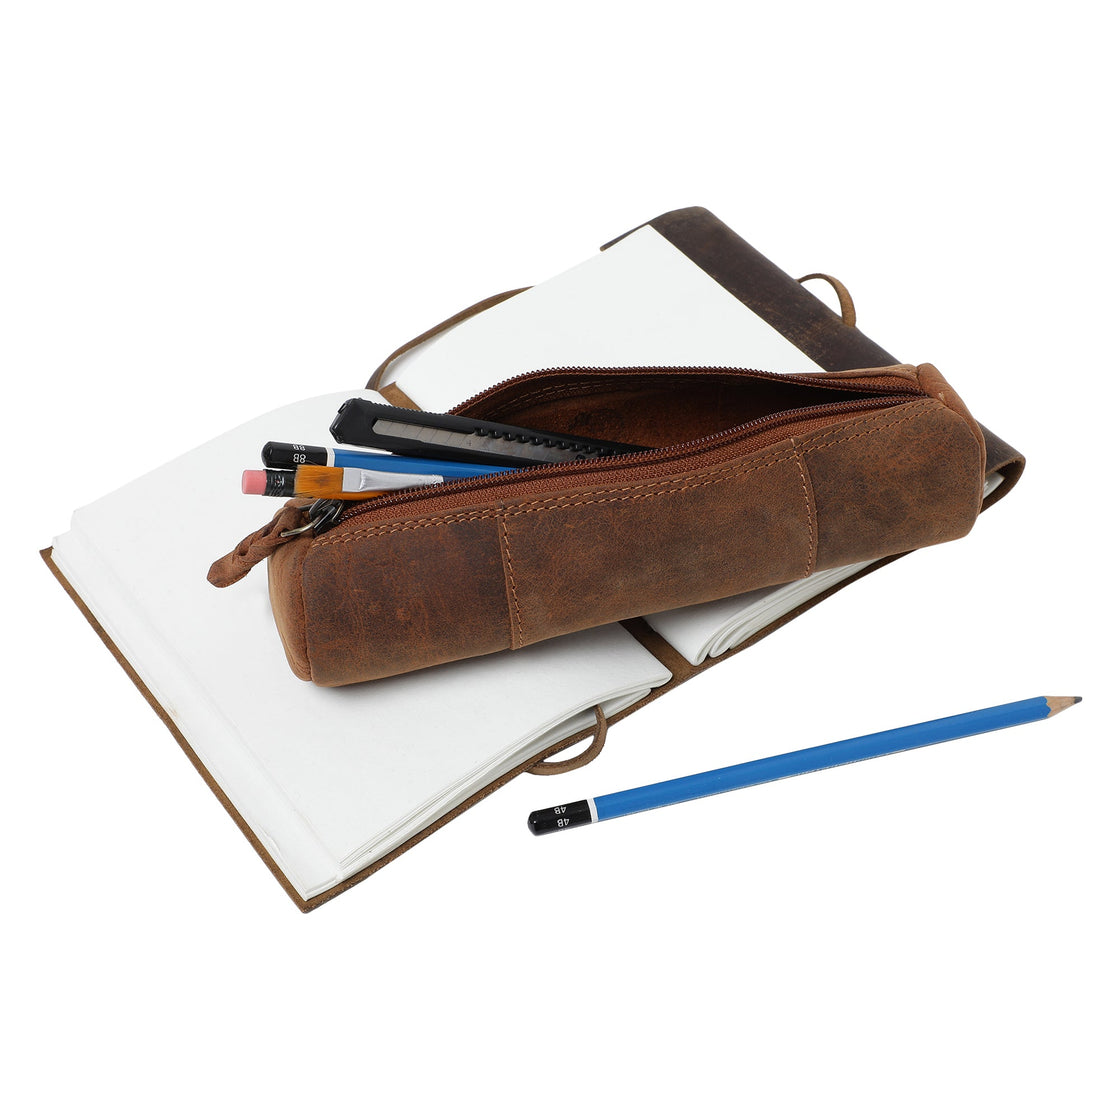 Winnie Leather Pencil Pouch - Zippered Pen Case for School, Work